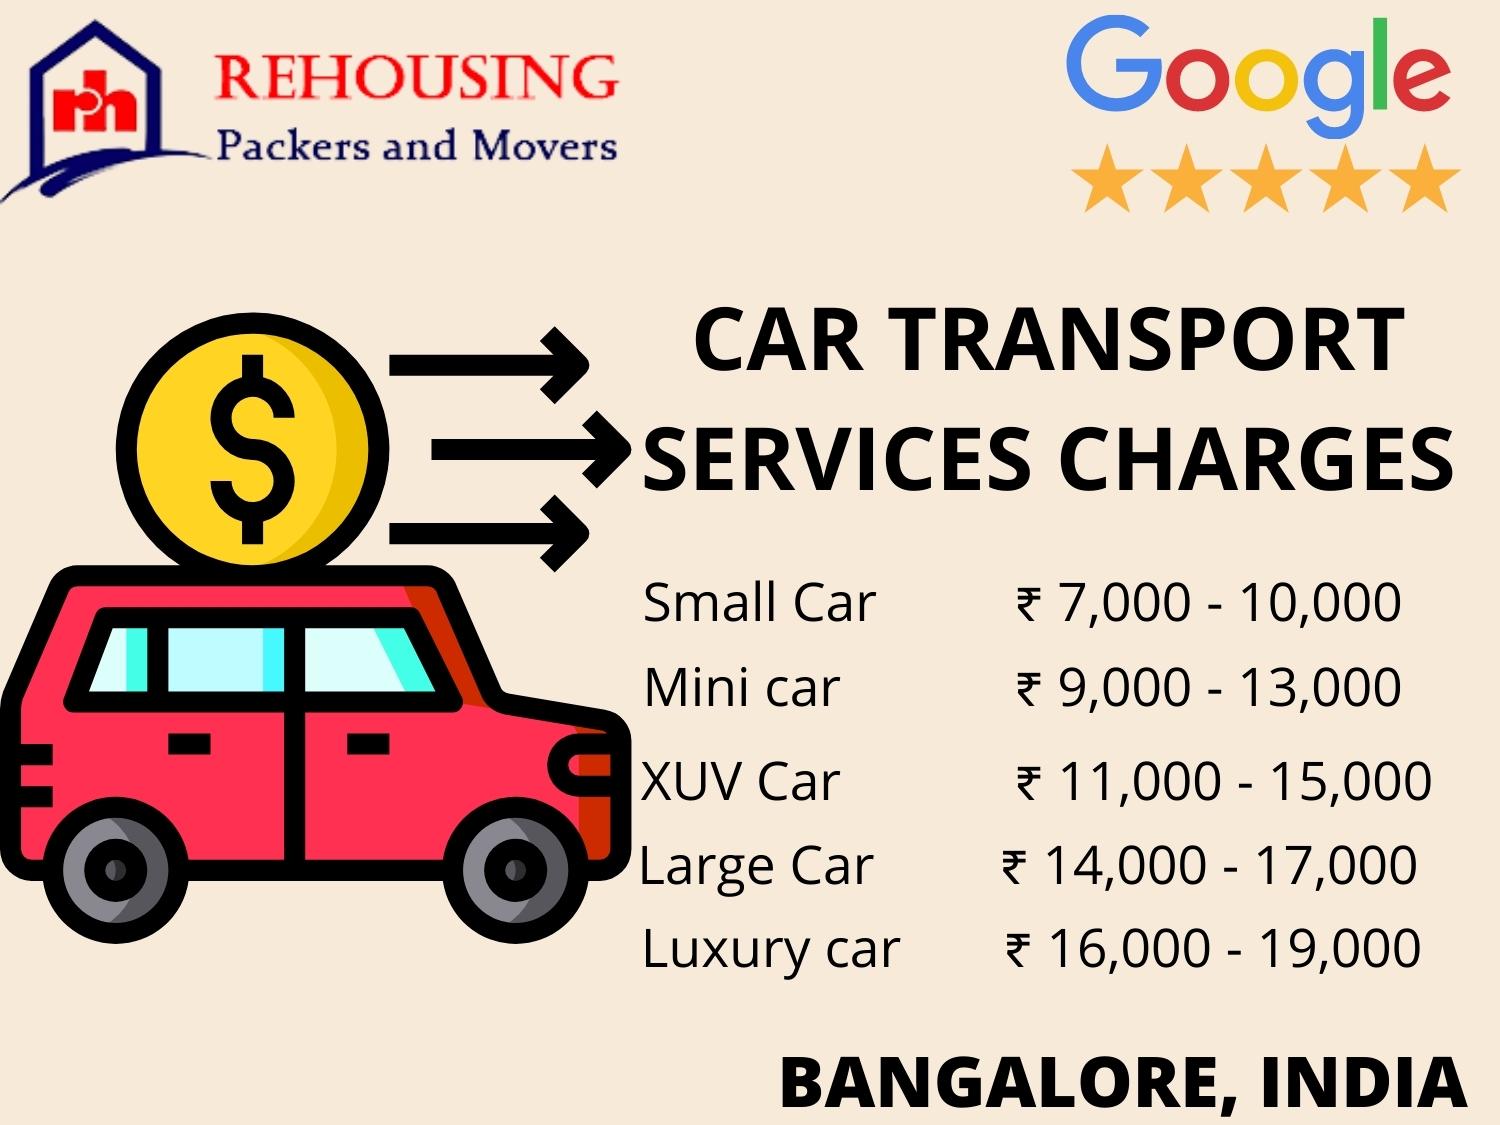 Car transport service charges in Bangalore